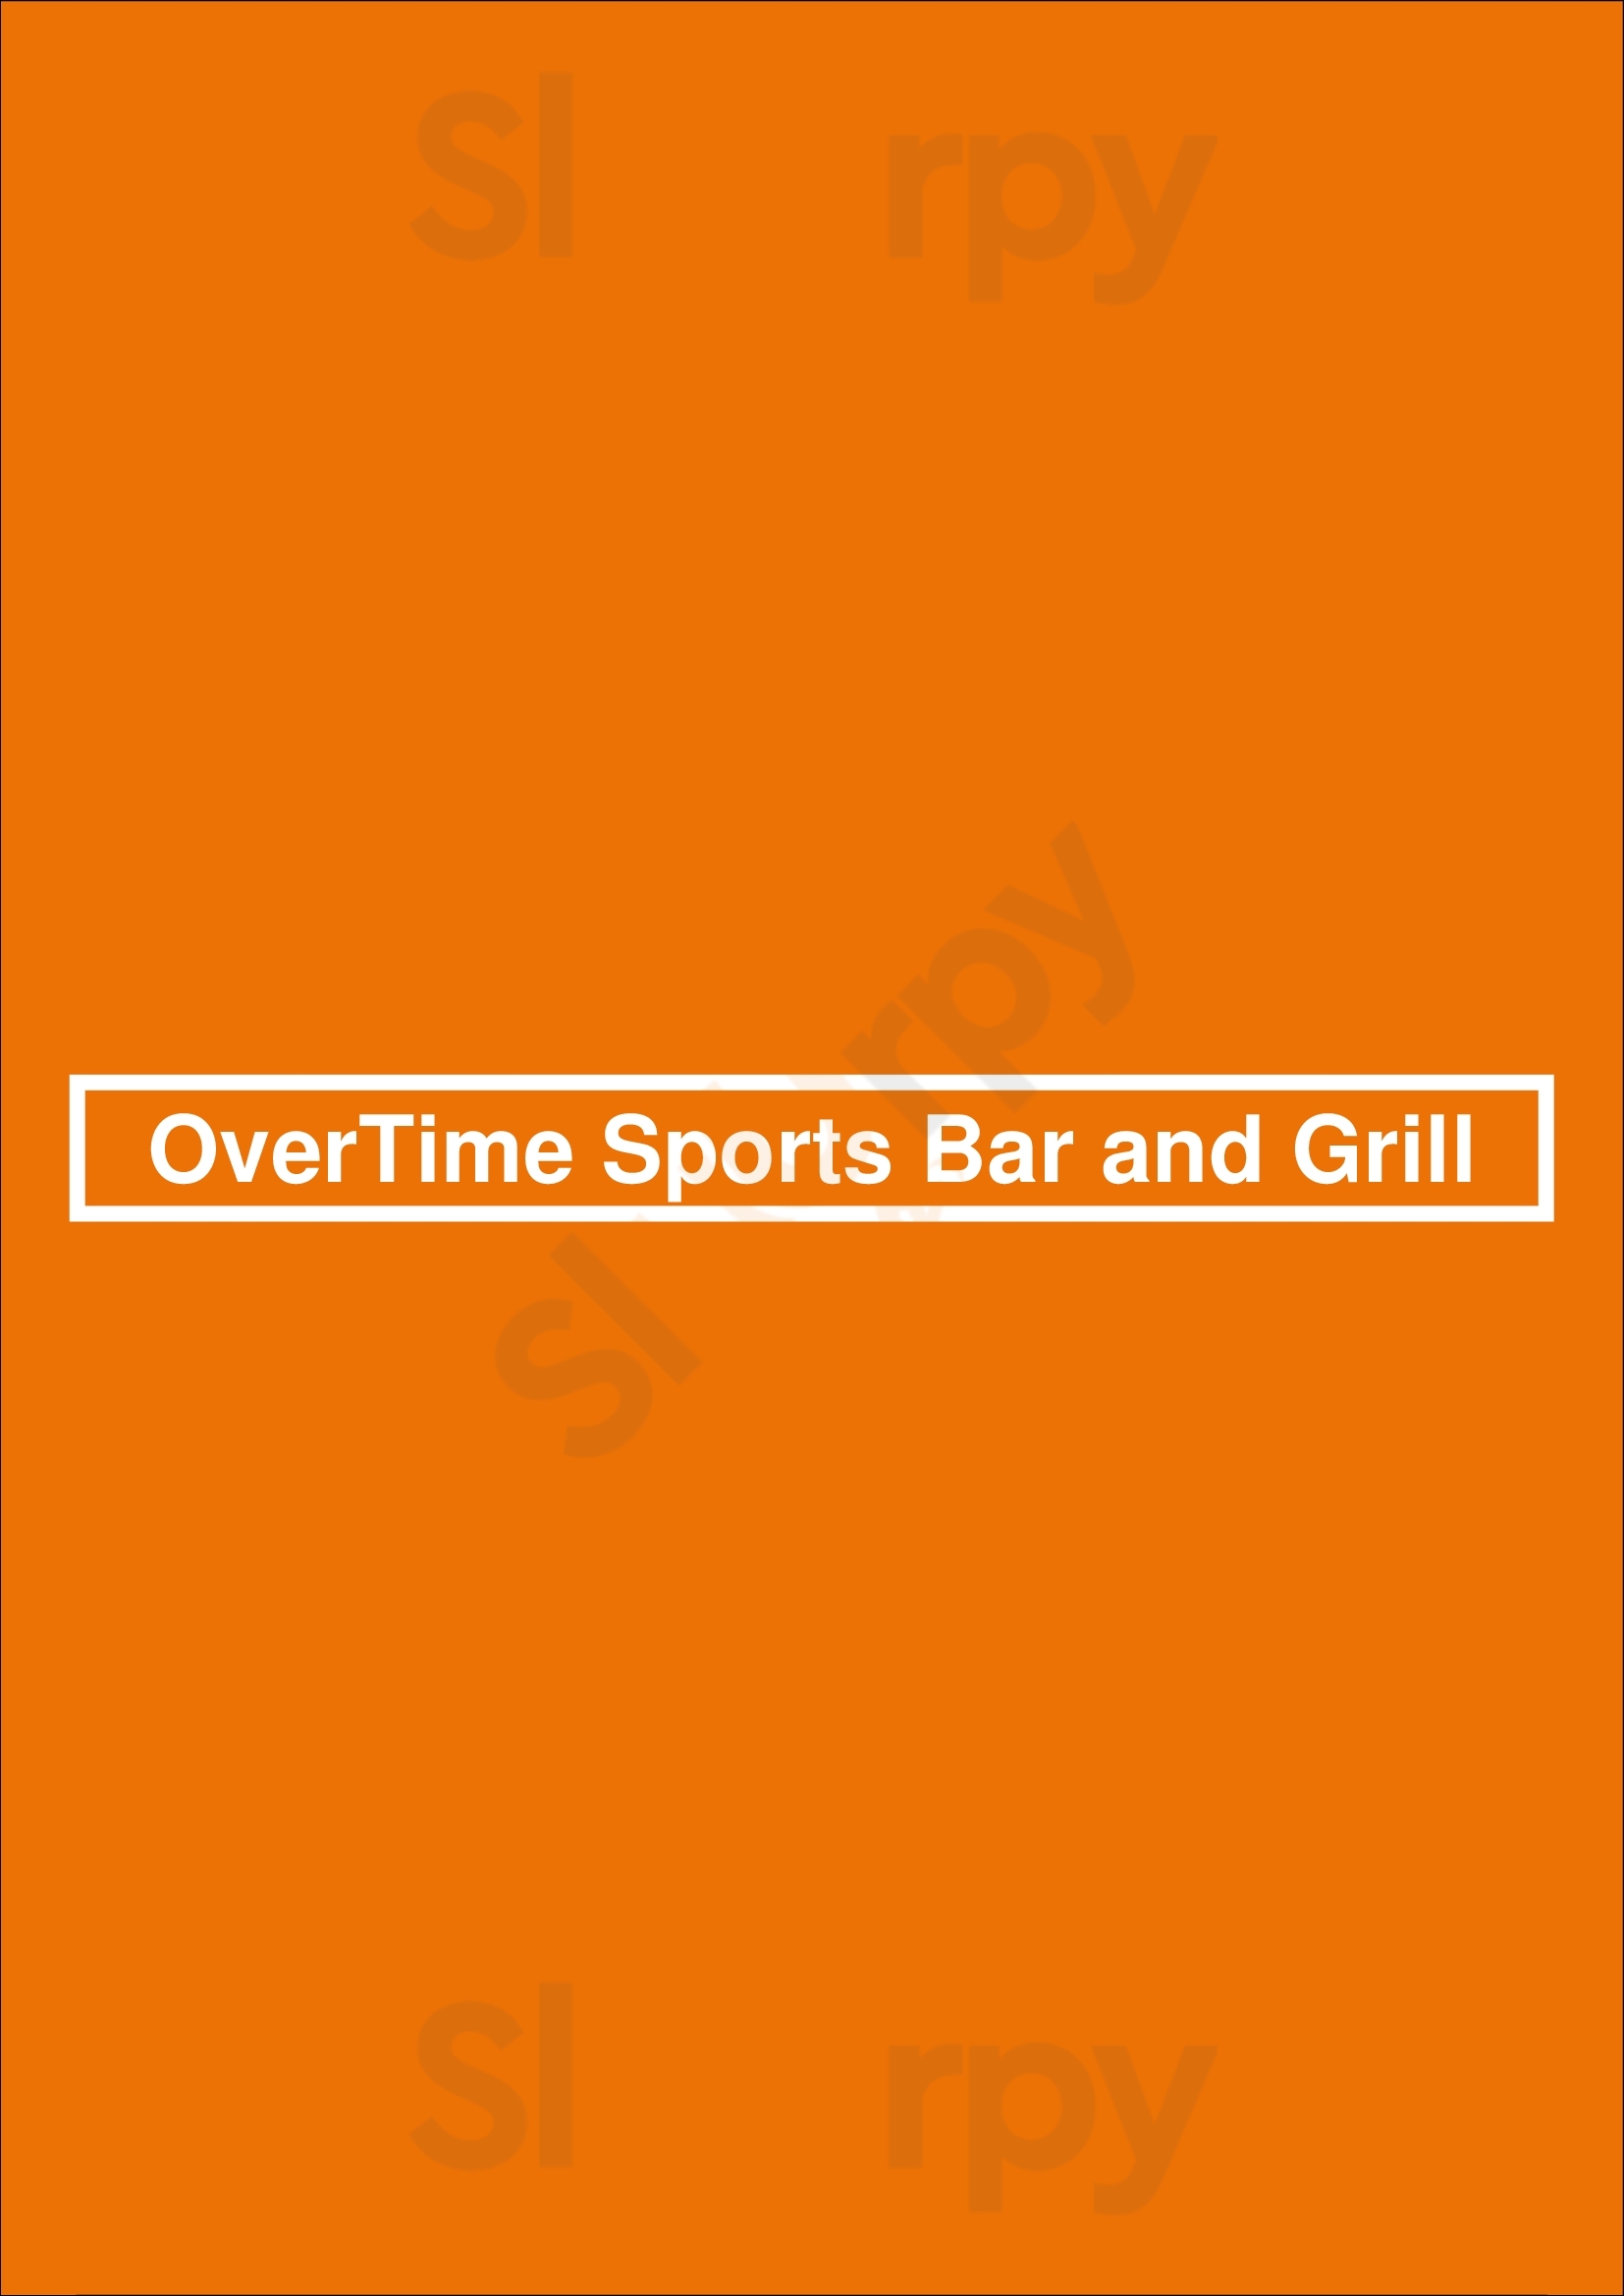 Overtime Sports Bar And Grill Chicago Menu - 1